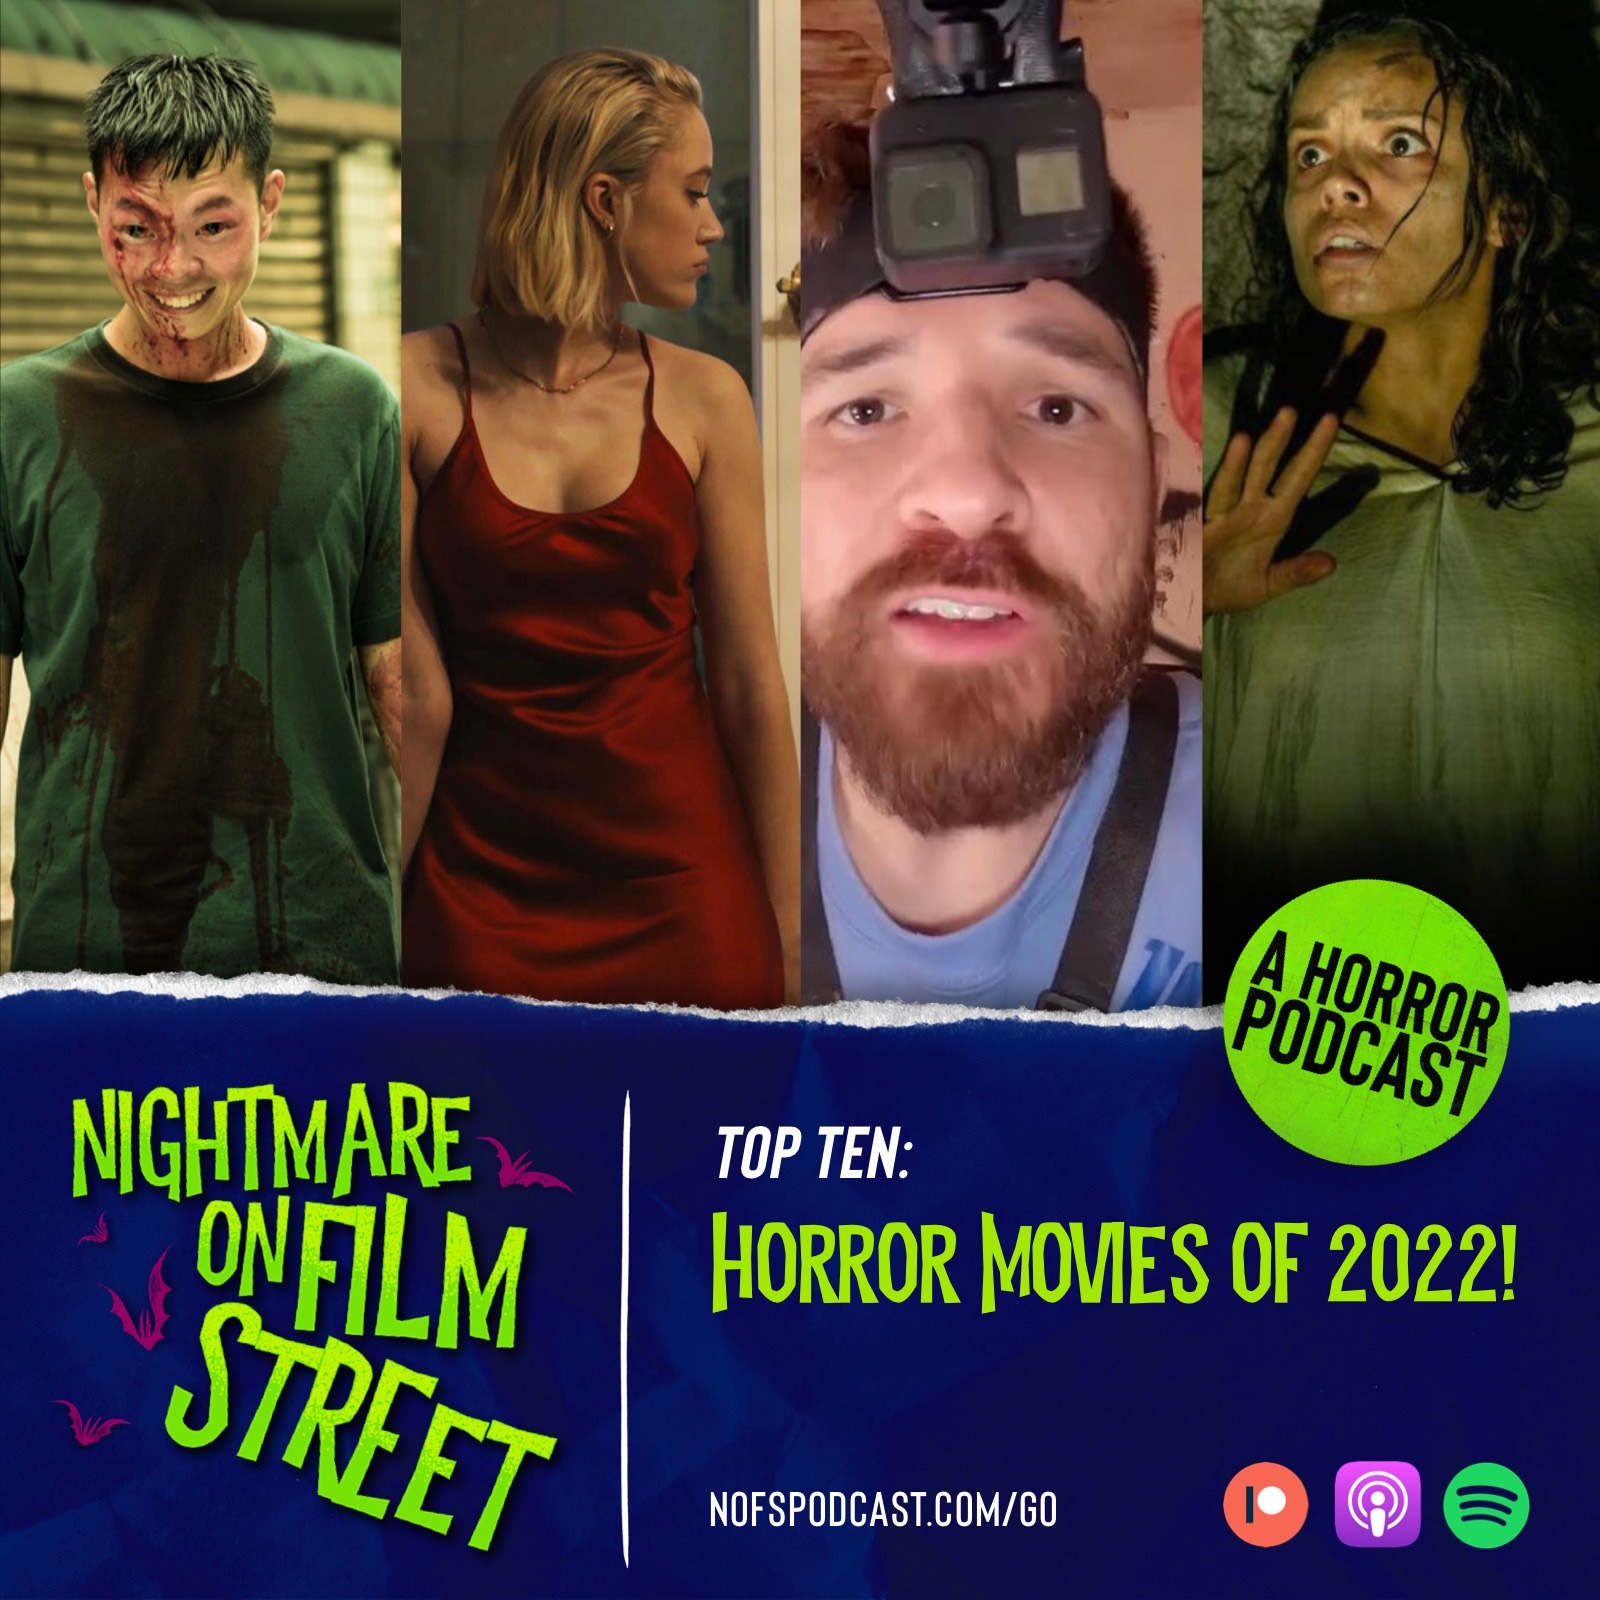 Top 10 Horror Movies of 2022